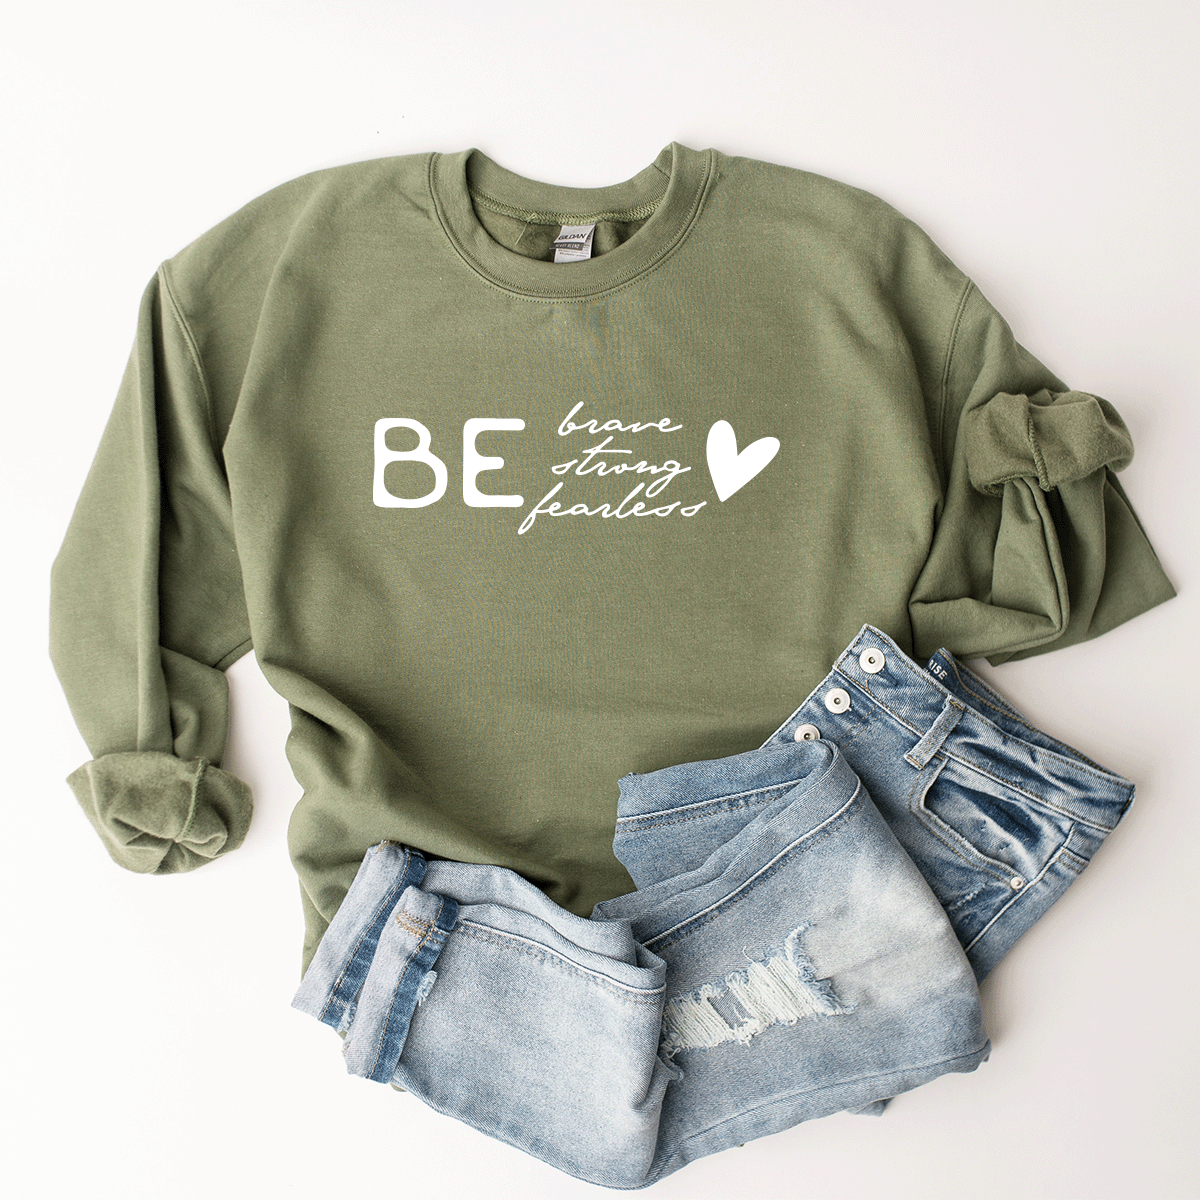 Be Brave, Strong, Fearless - Sweatshirt